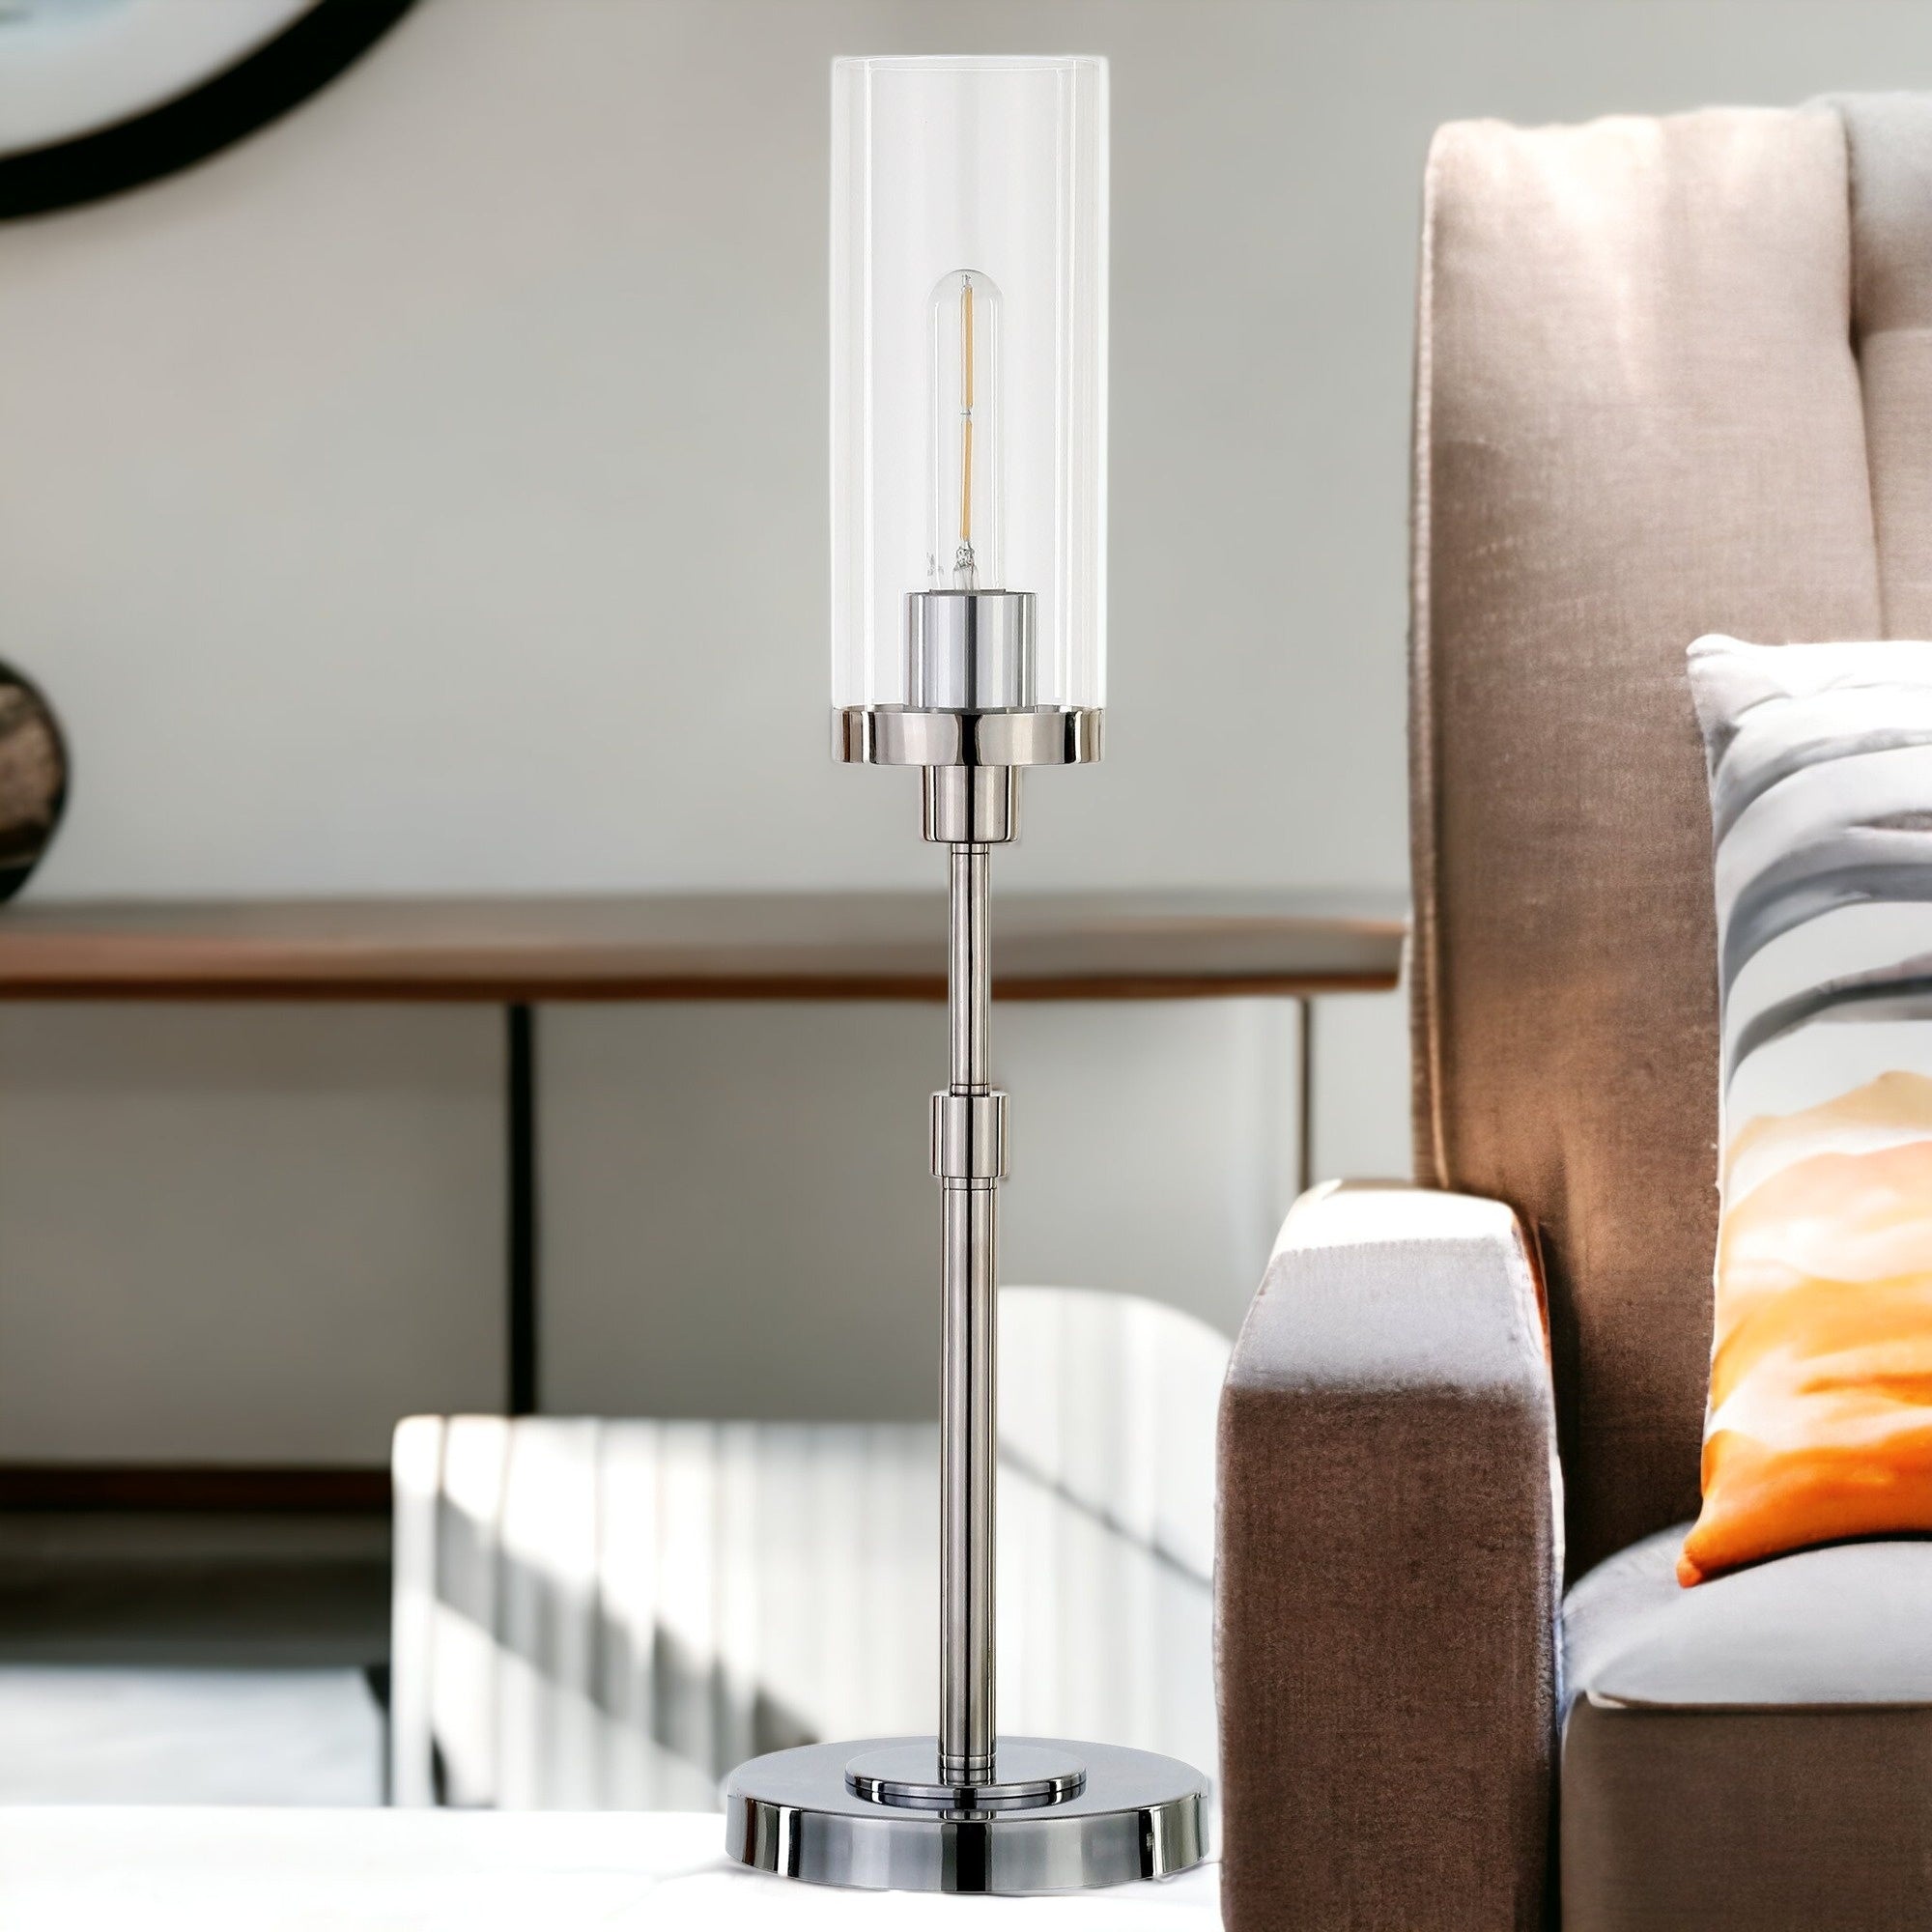 26" Nickel Metal Table Lamp With Clear Cylinder Shade